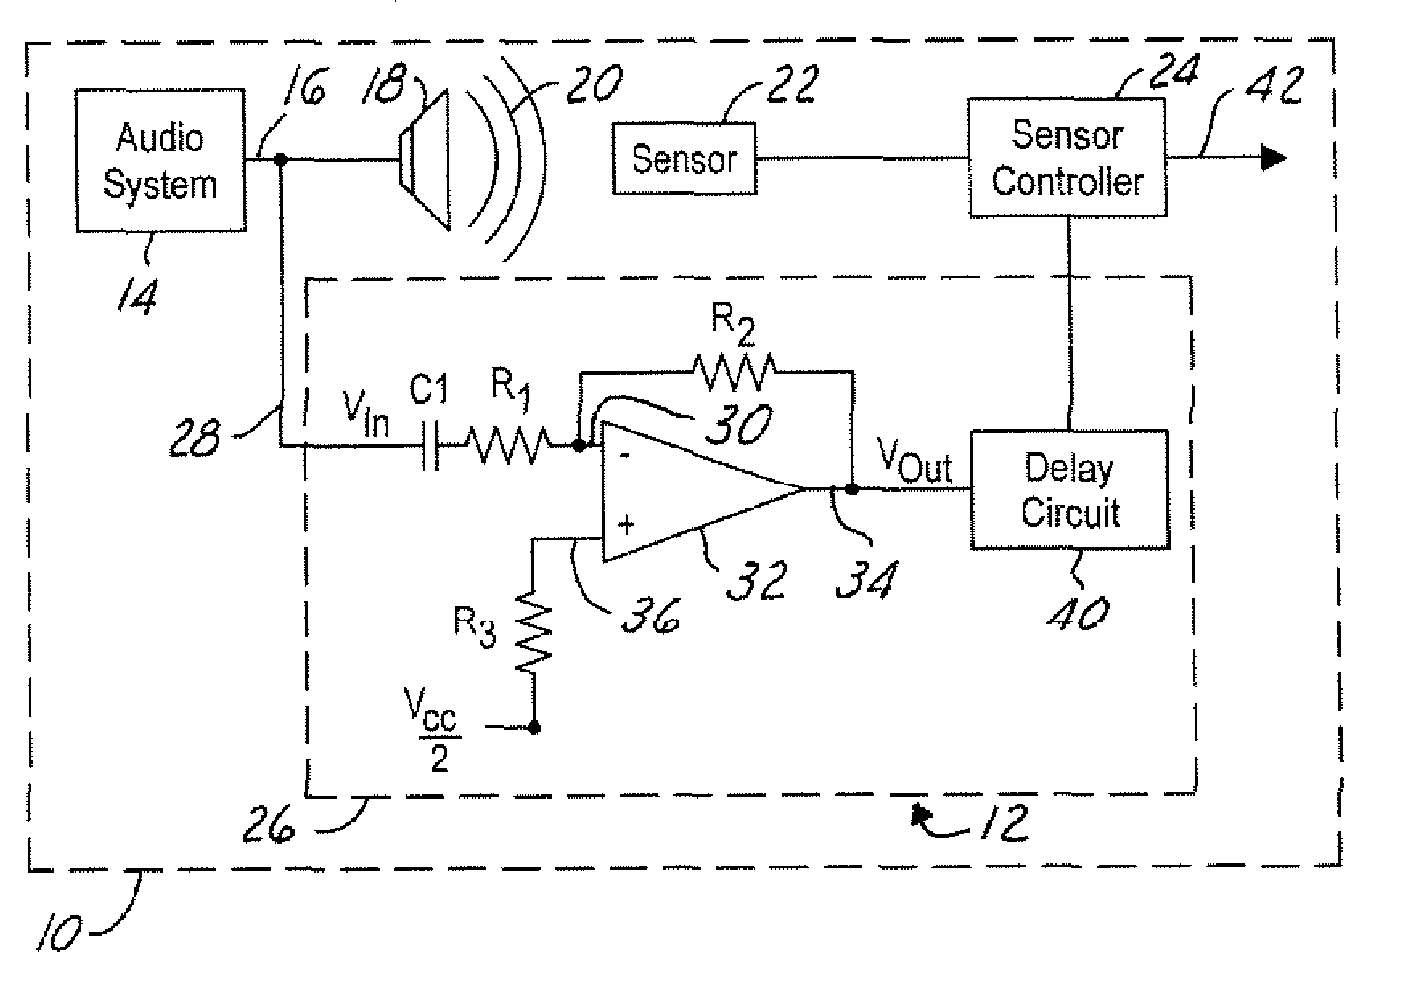 Audio noise cancellation system for a sensor in an automotive vehicle